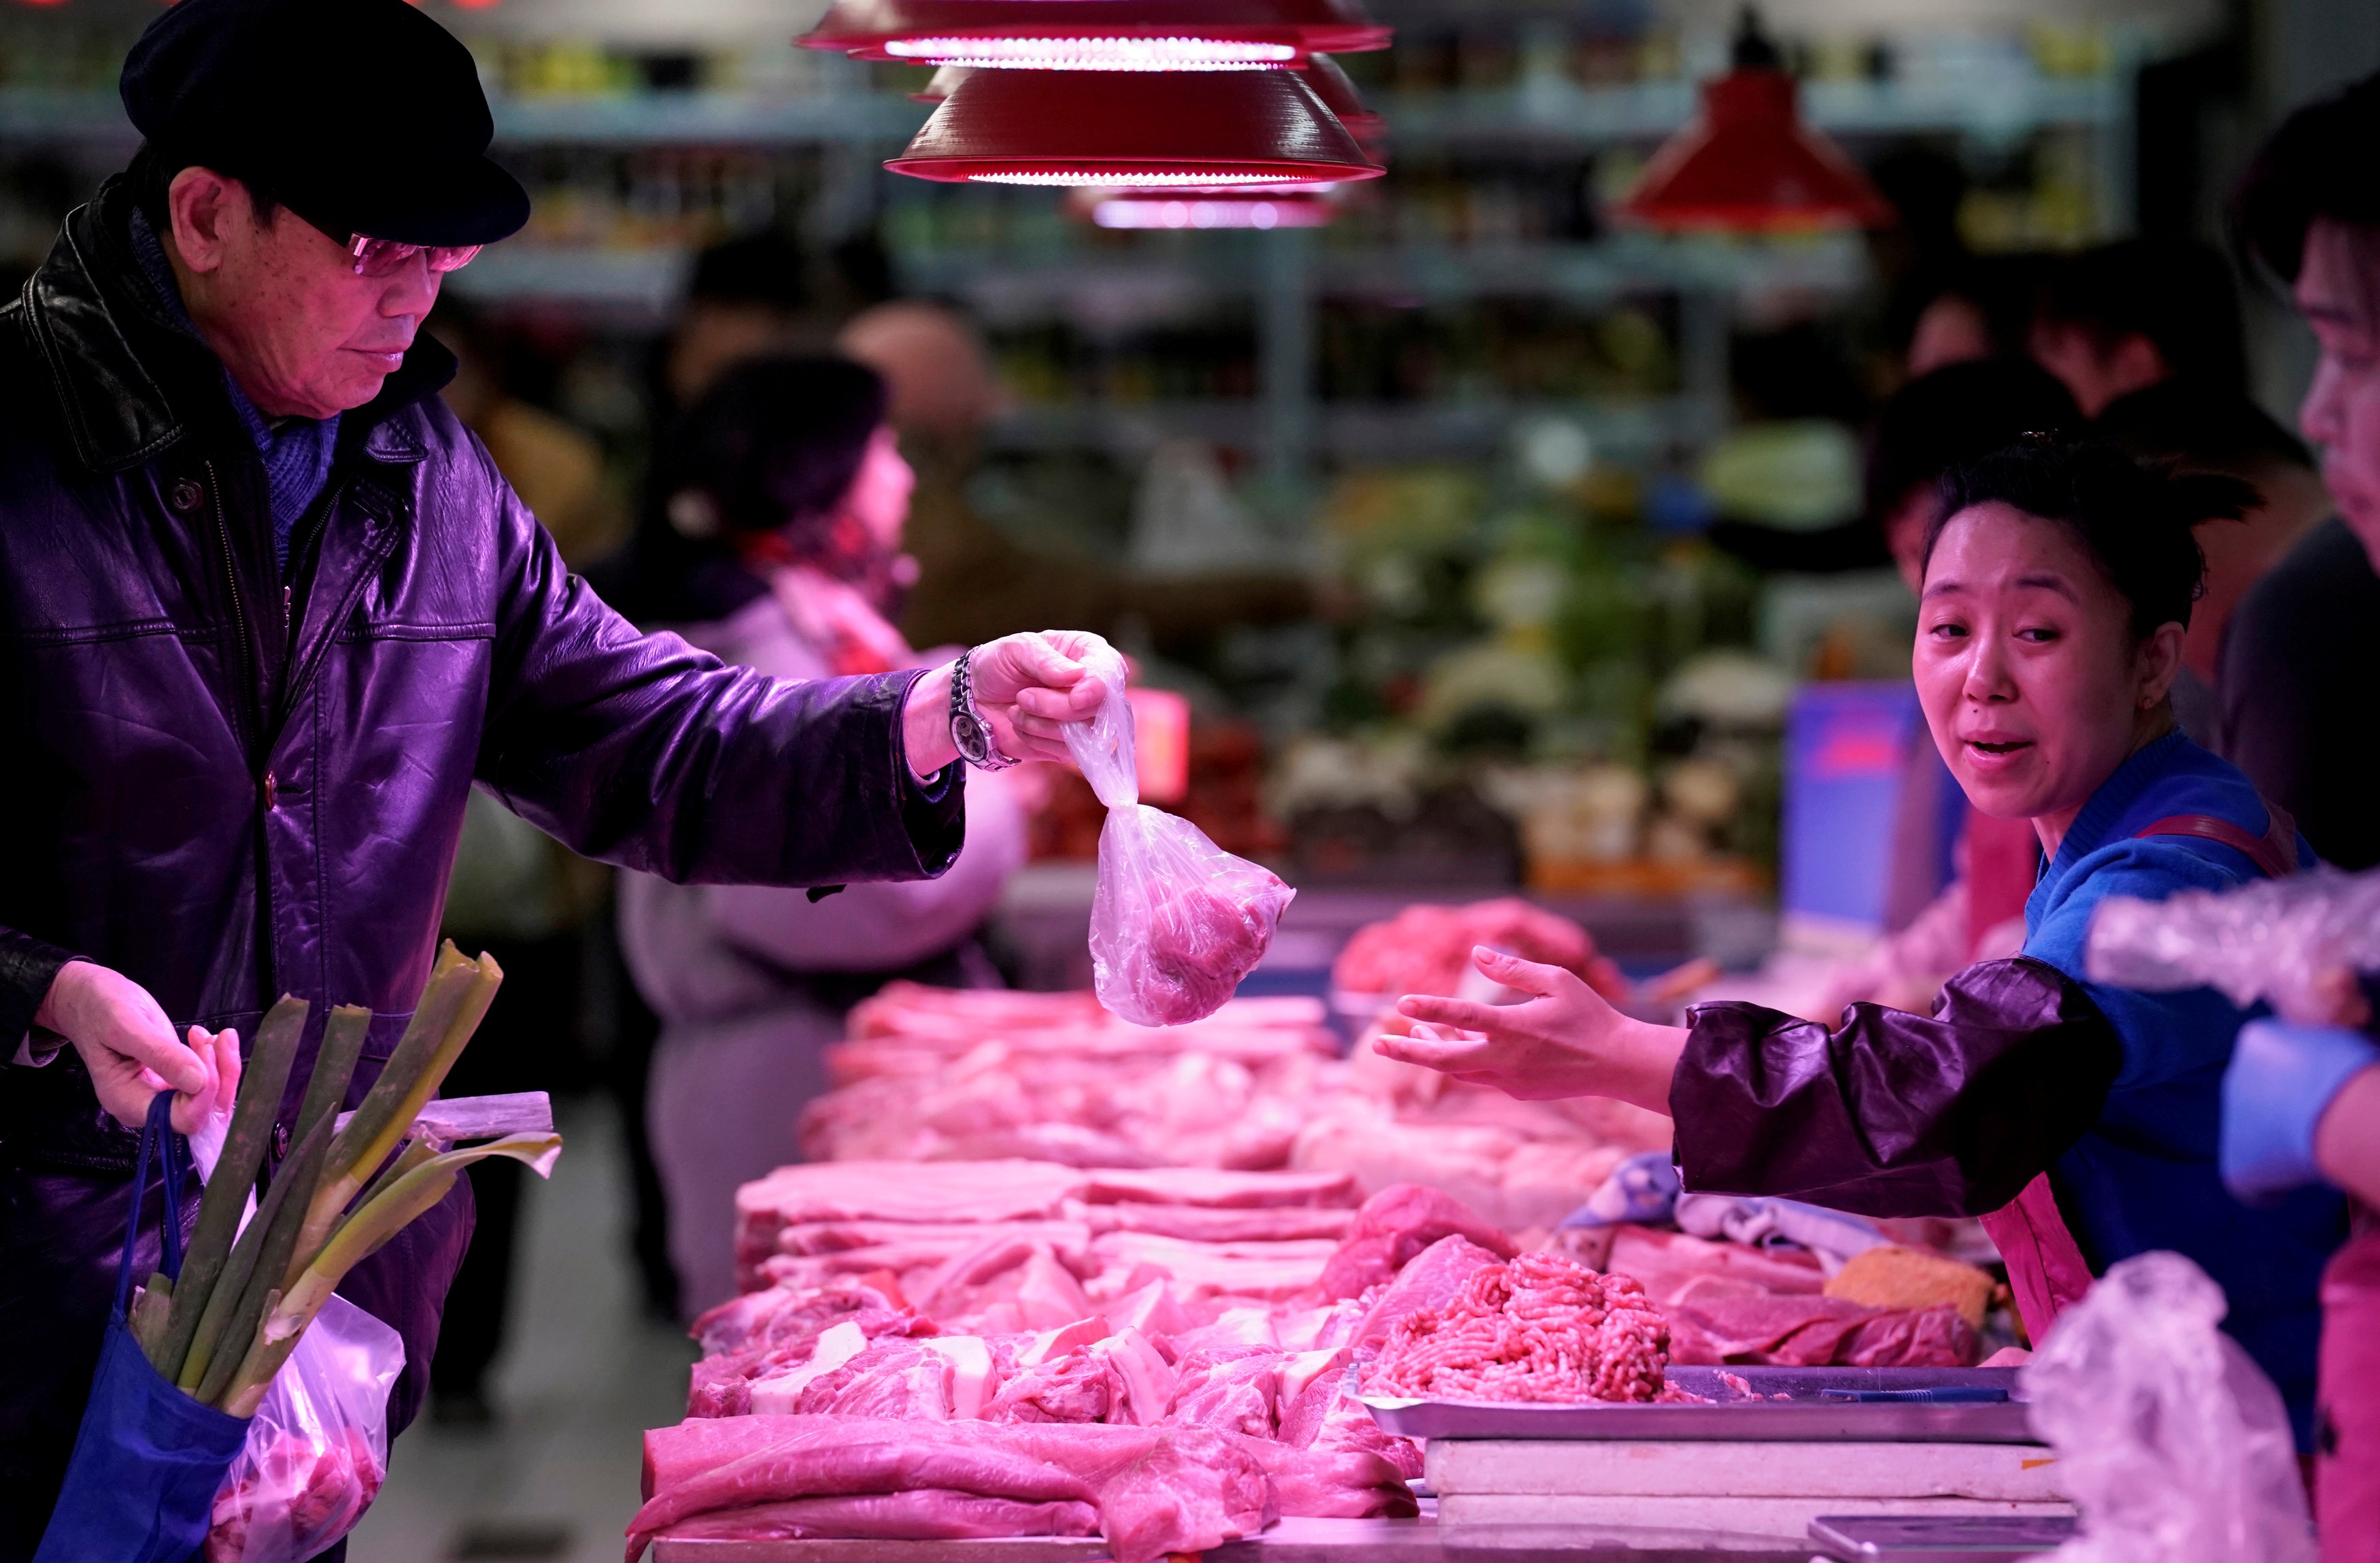 Pork prices rose by nearly 30 per cent in June compared with a year earlier, according to the Ministry of Agriculture and Rural Affairs. Photo: Reuters